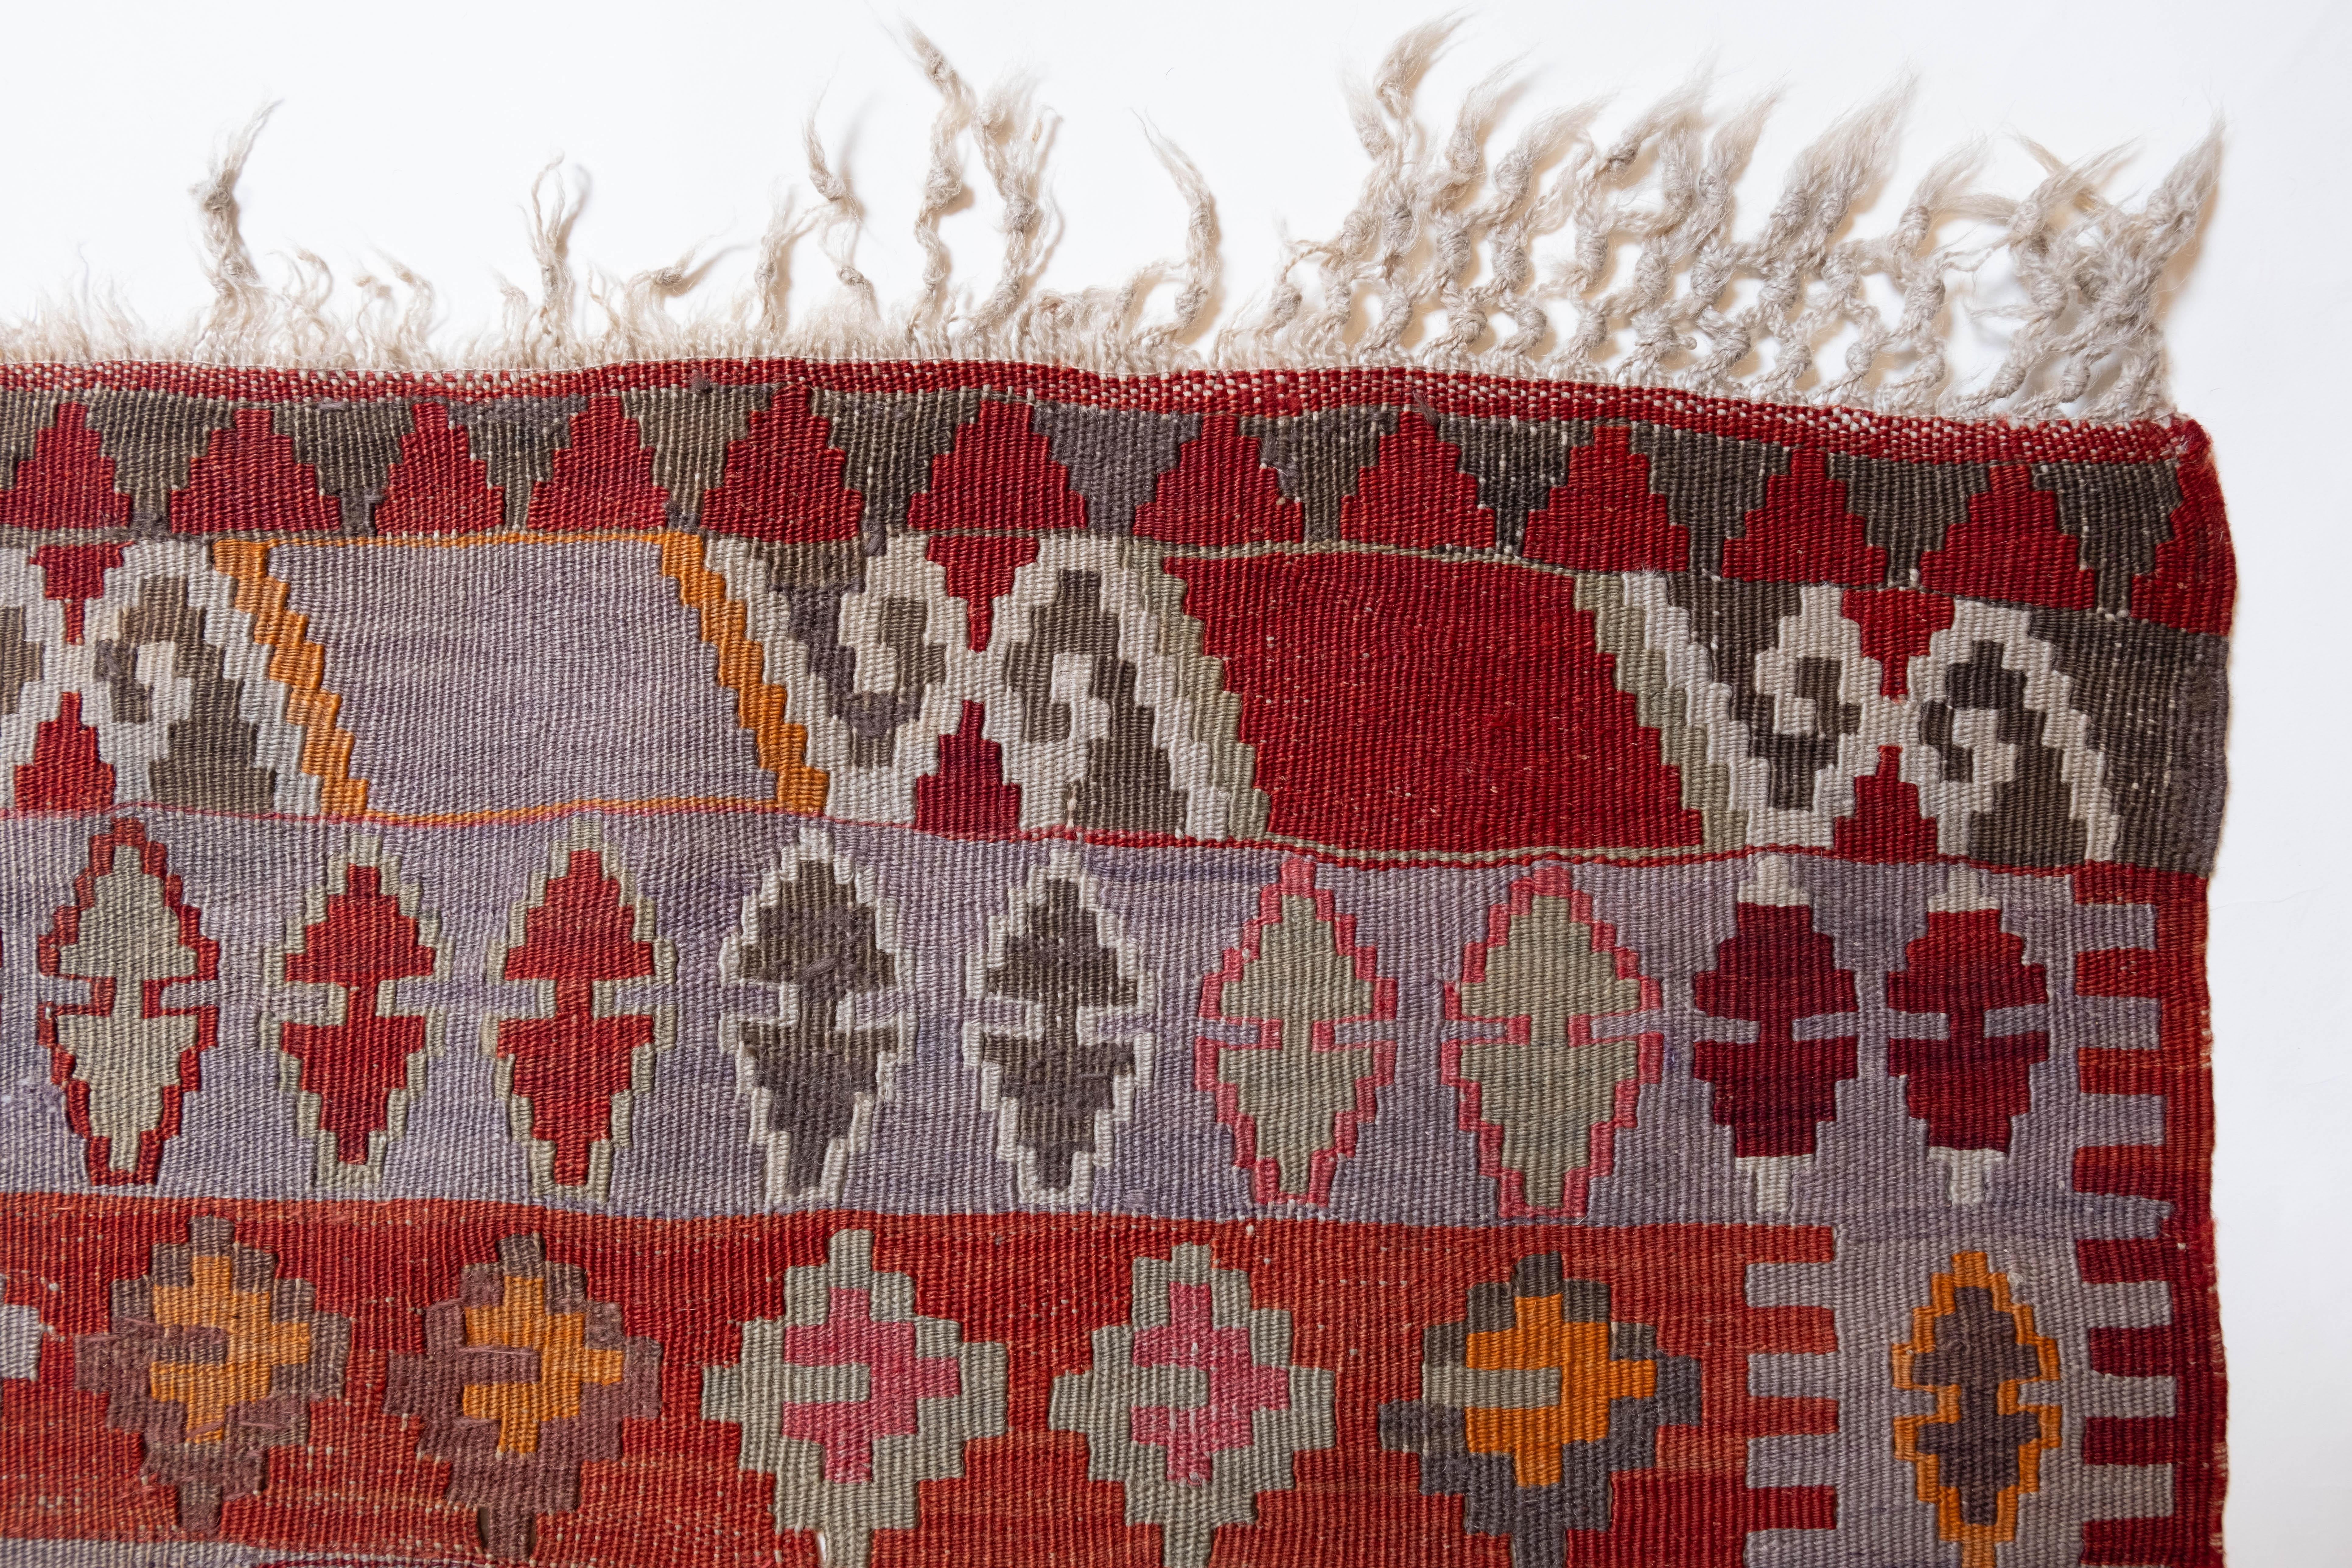 This is Eastern Anatolian antique Kilim from the Erzurum region with a rare and beautiful color composition. 

This highly collectible antique kilim has wonderful special colors and textures that are typical of an old kilim in good condition. It is